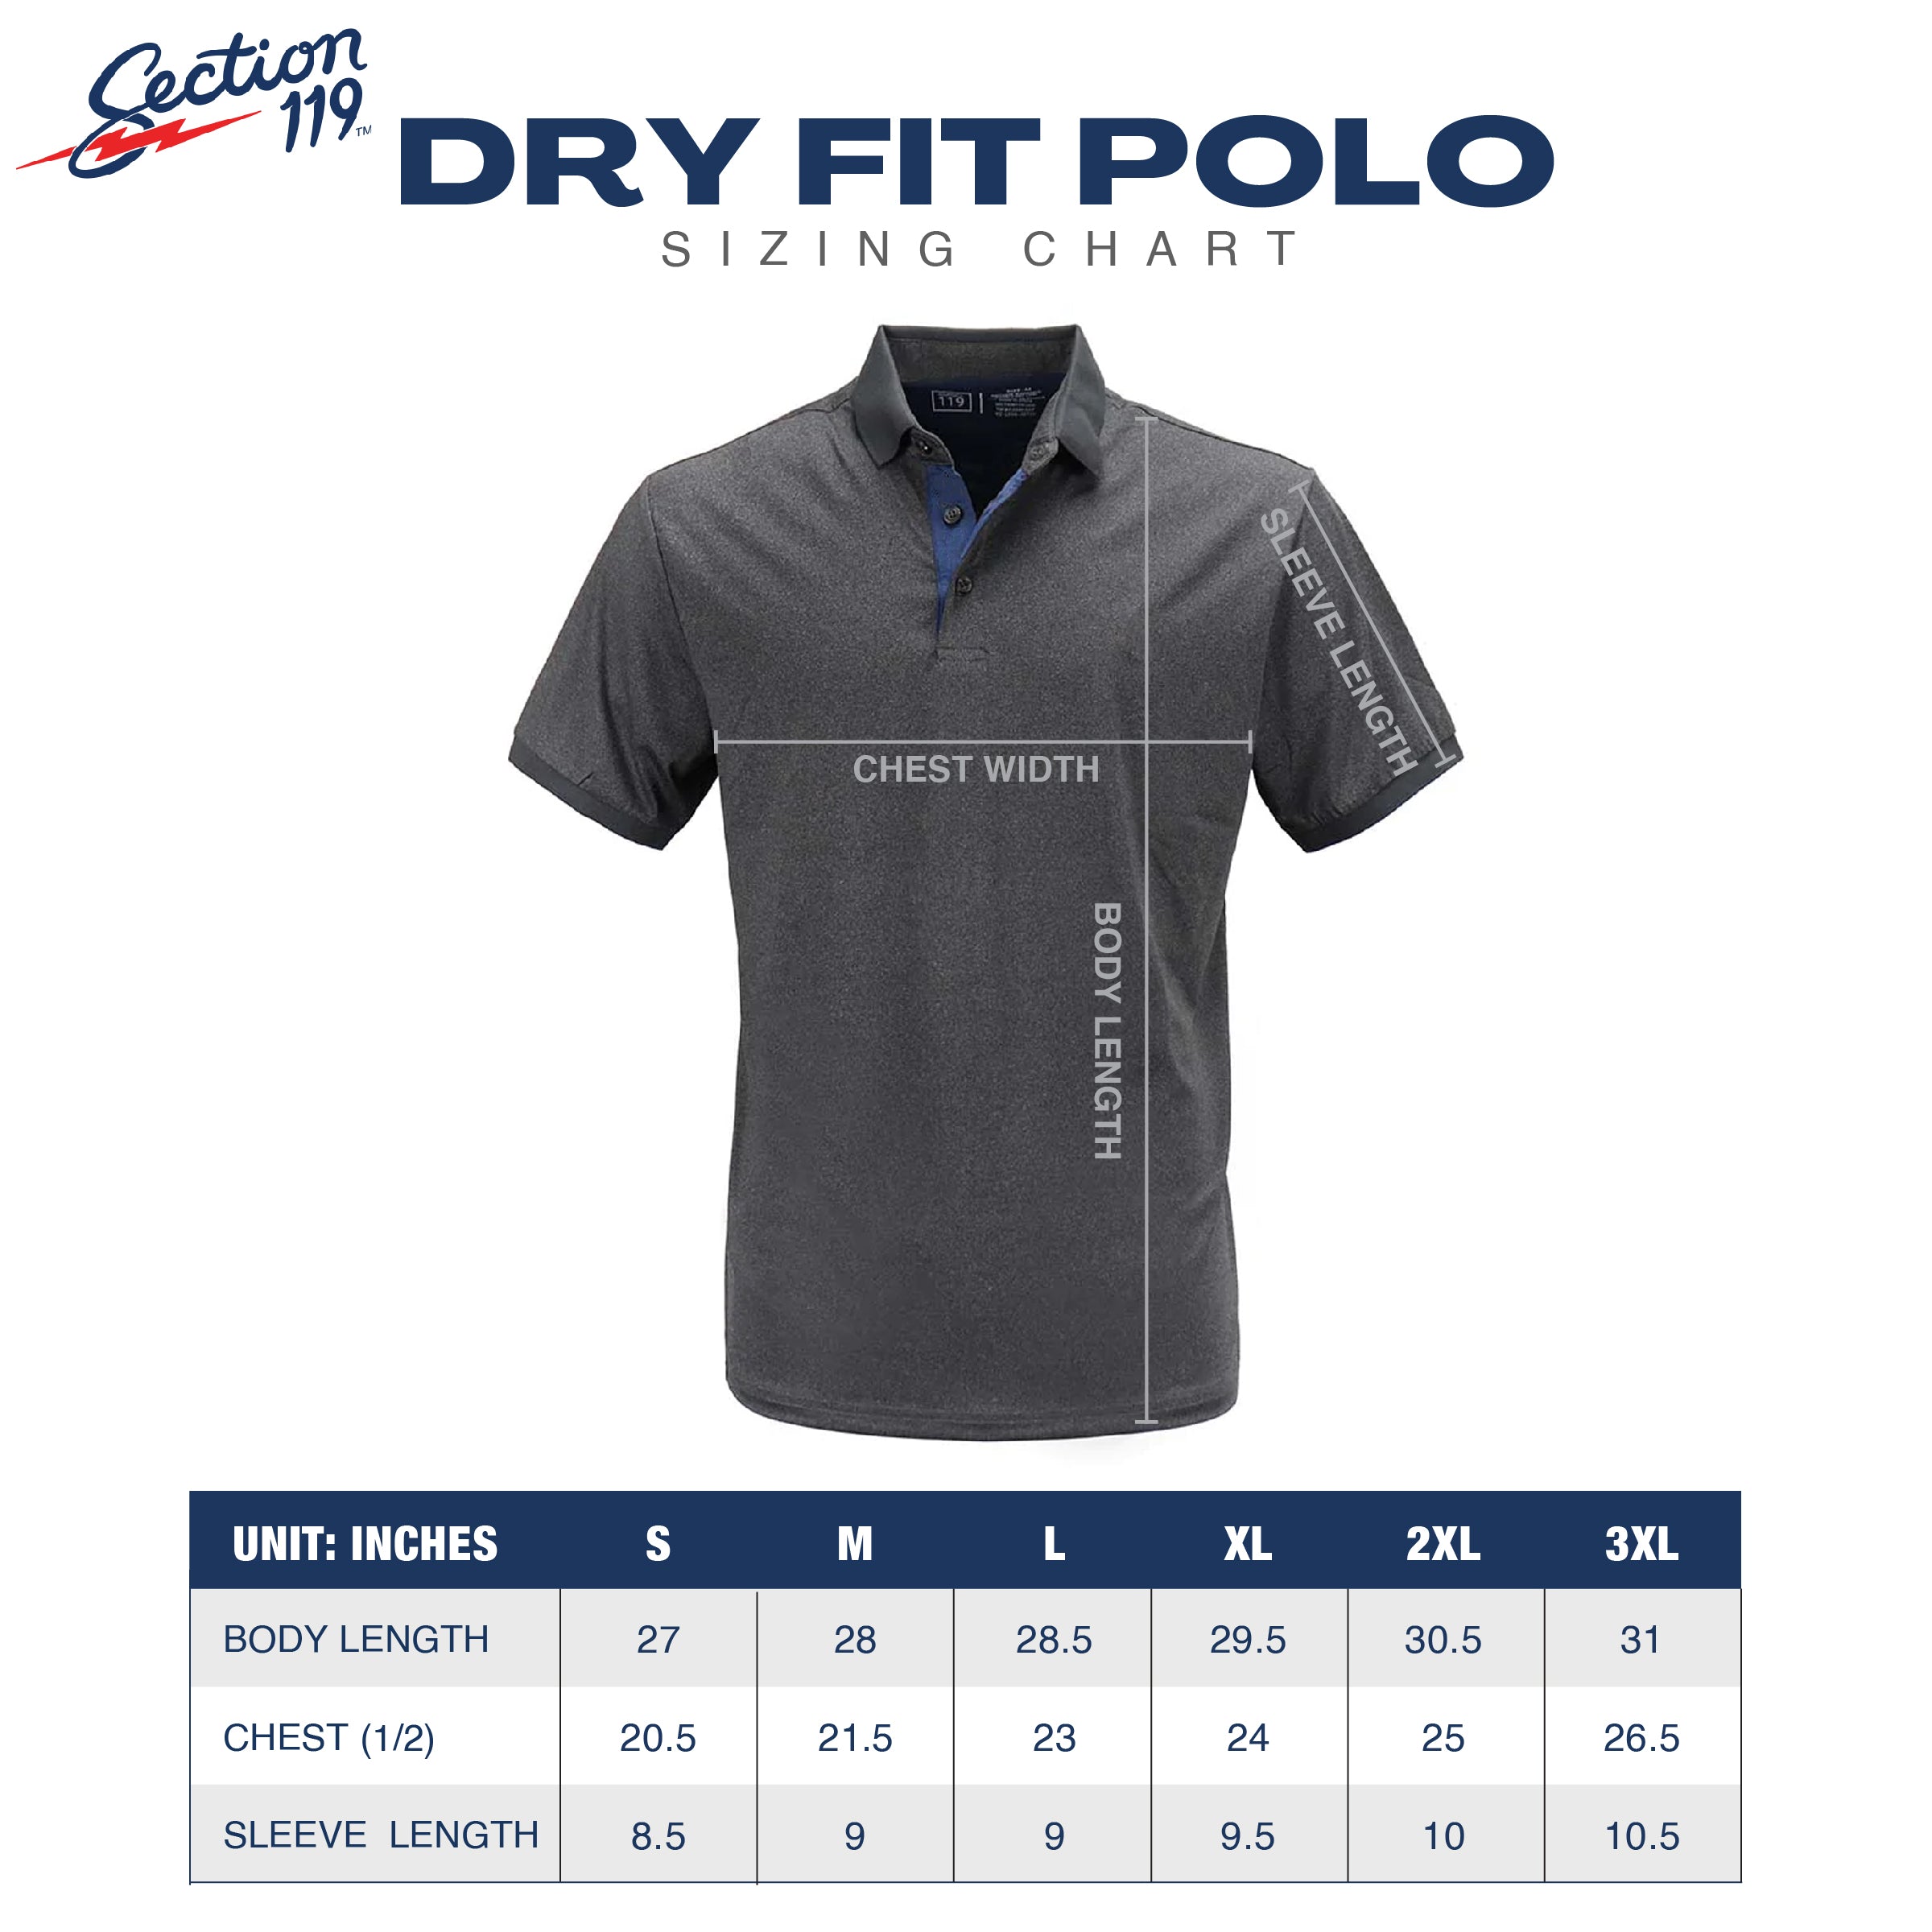 Phish Dry Fit Navy Polo - Section 119